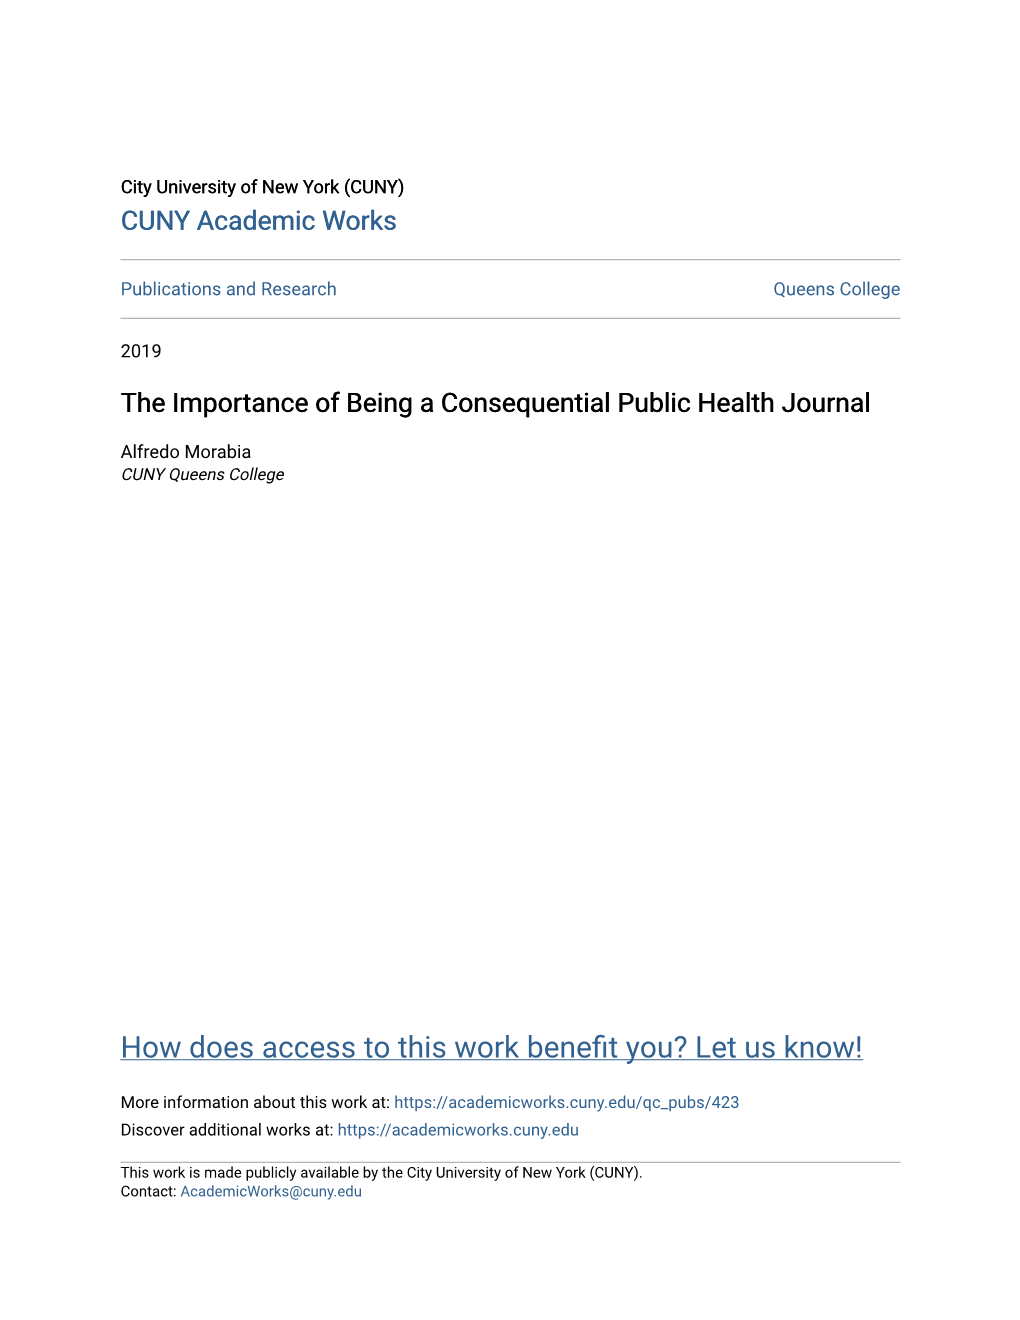 The Importance of Being a Consequential Public Health Journal